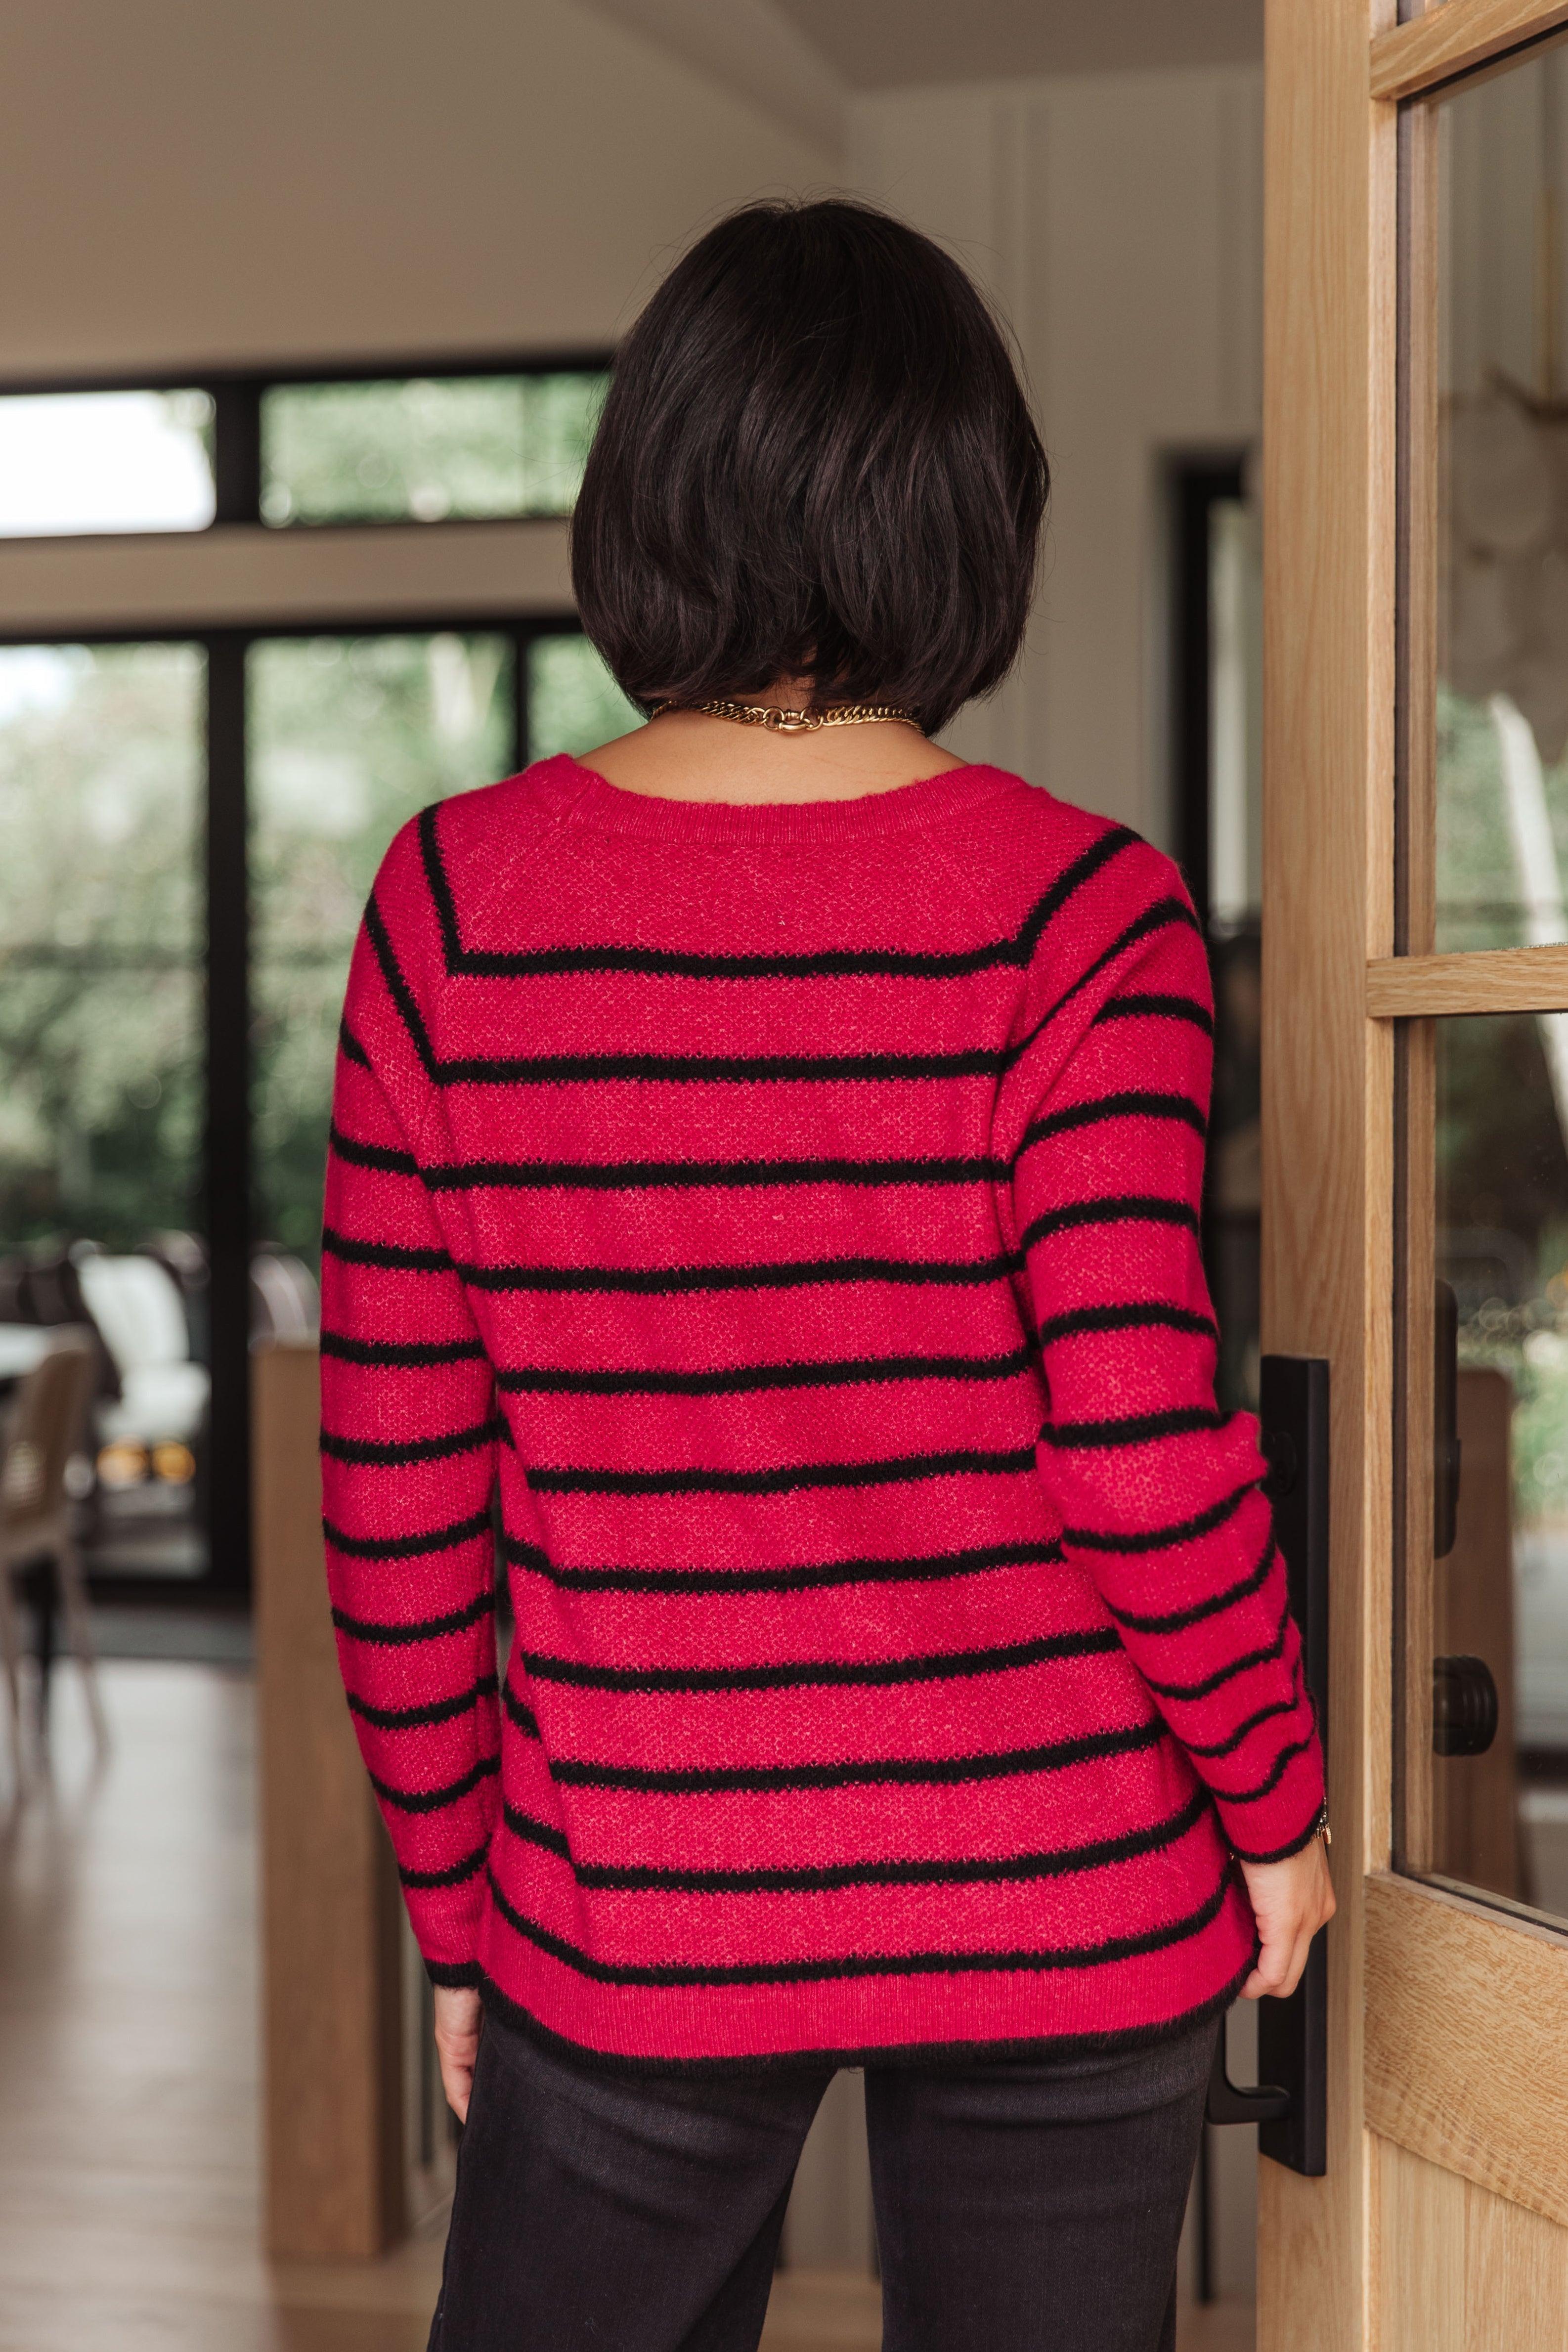 Are We There Yet? Striped Sweater Womens Ave Shops   